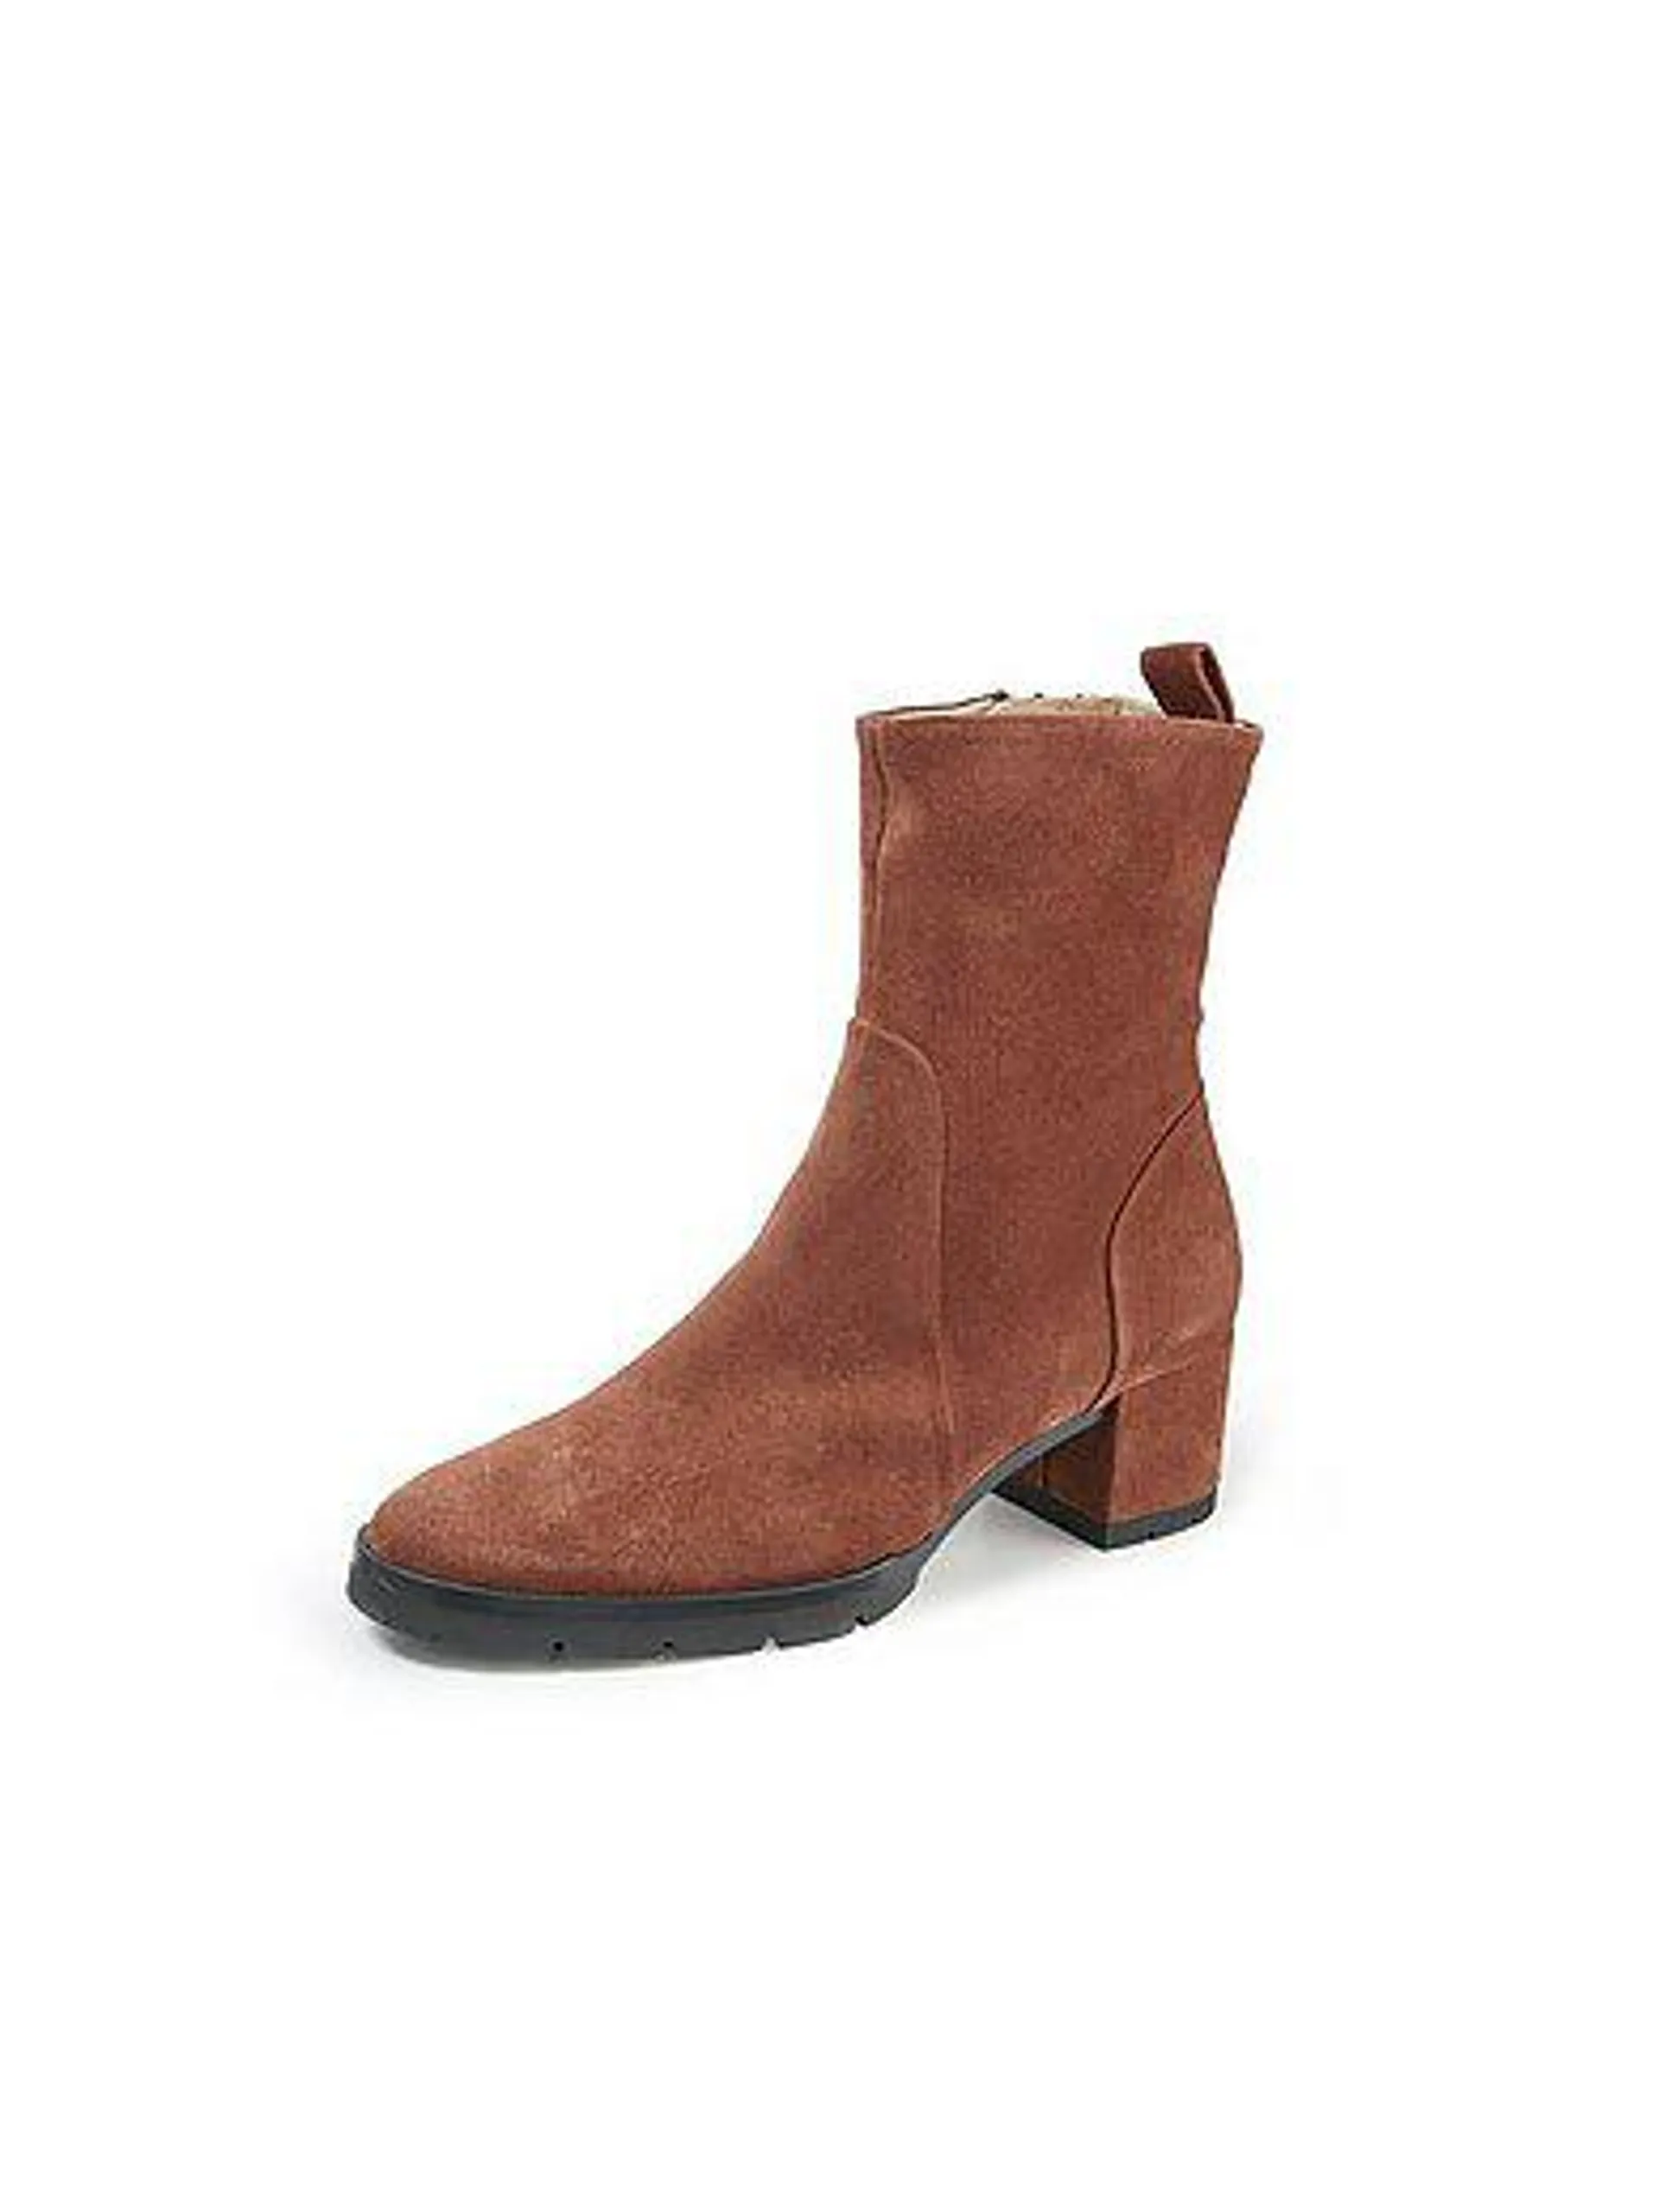 Ankle boots in calf suede